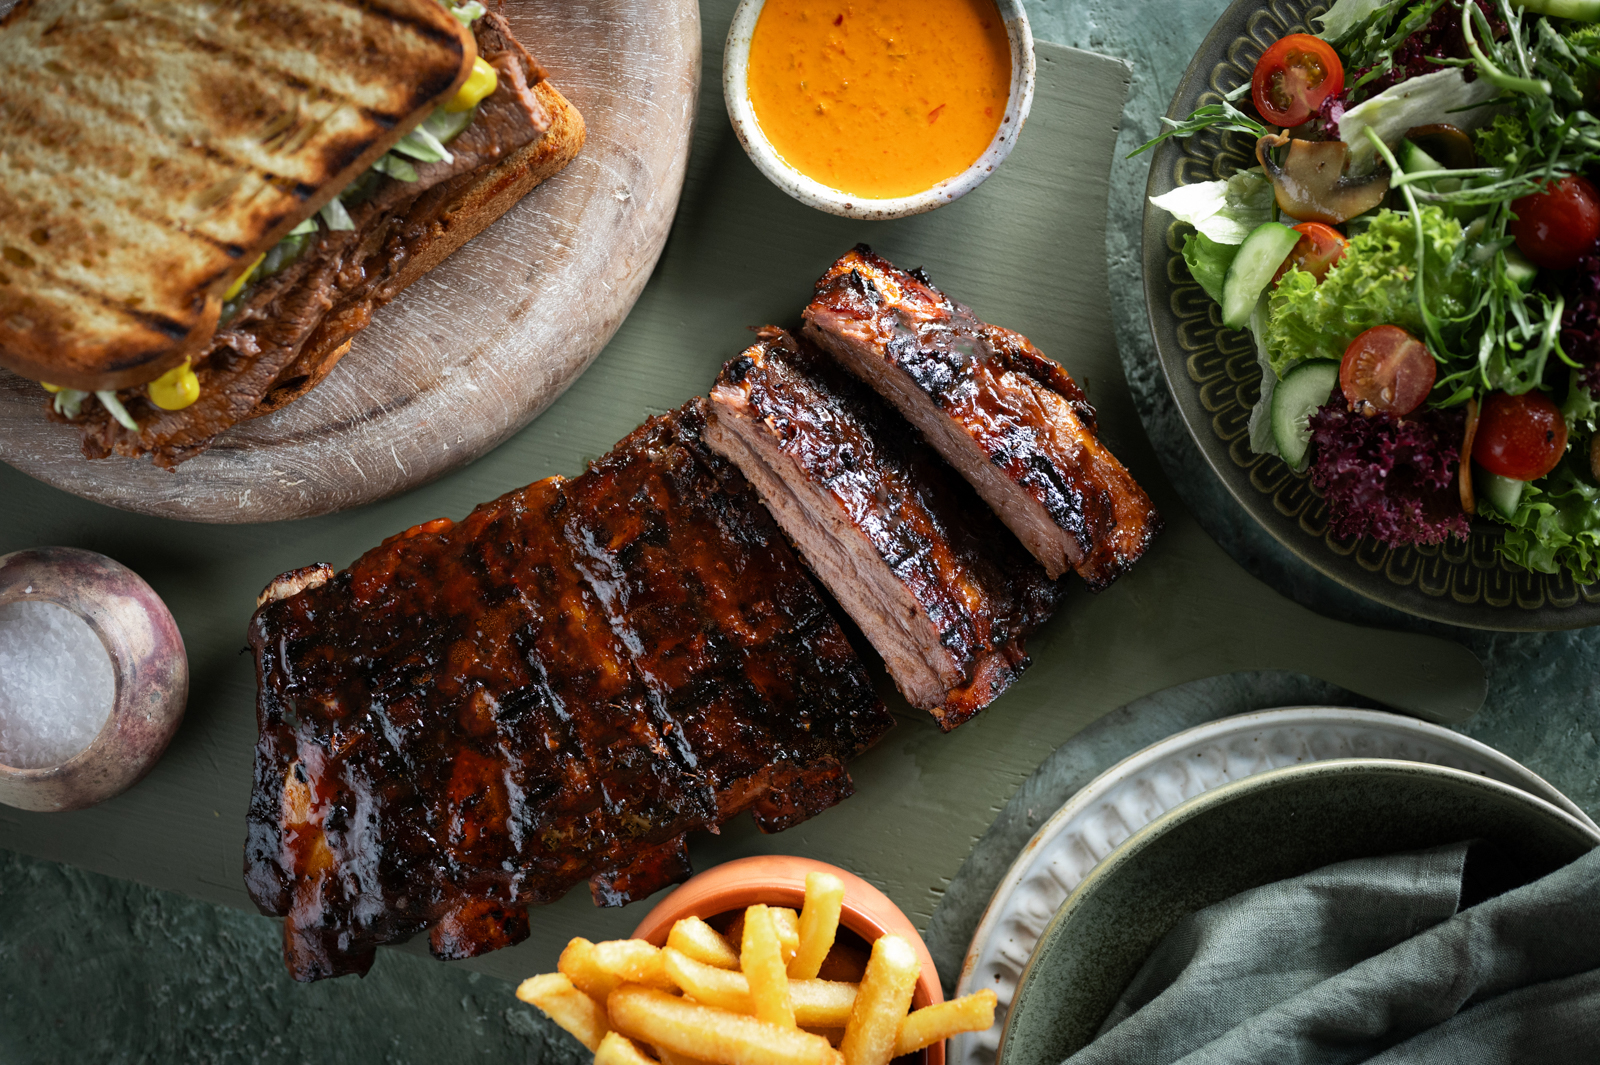 r&b Grillhouse, to Debut in the Middle East, Offering a distinctive Dining Experience